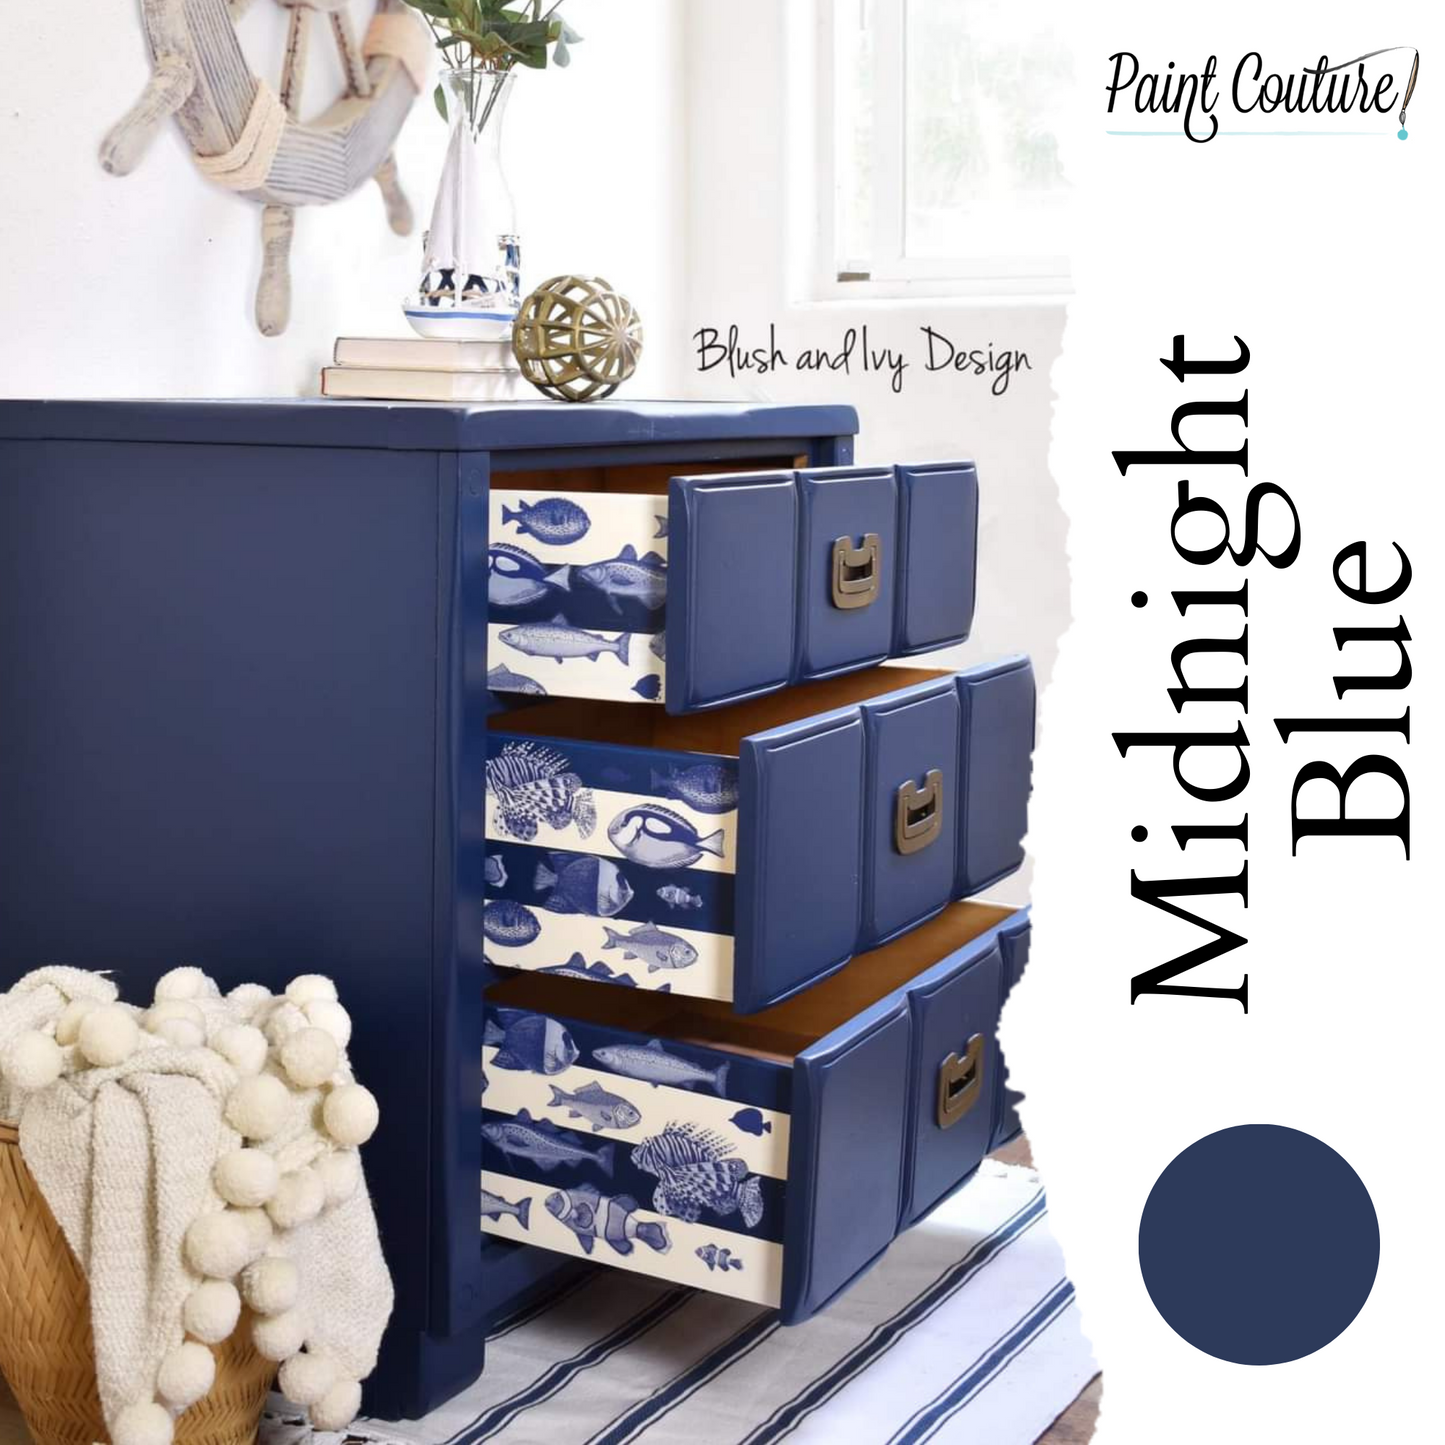 Paint Couture Midnight Blue - Acrylic Mineral Paint with a Flat Finish!